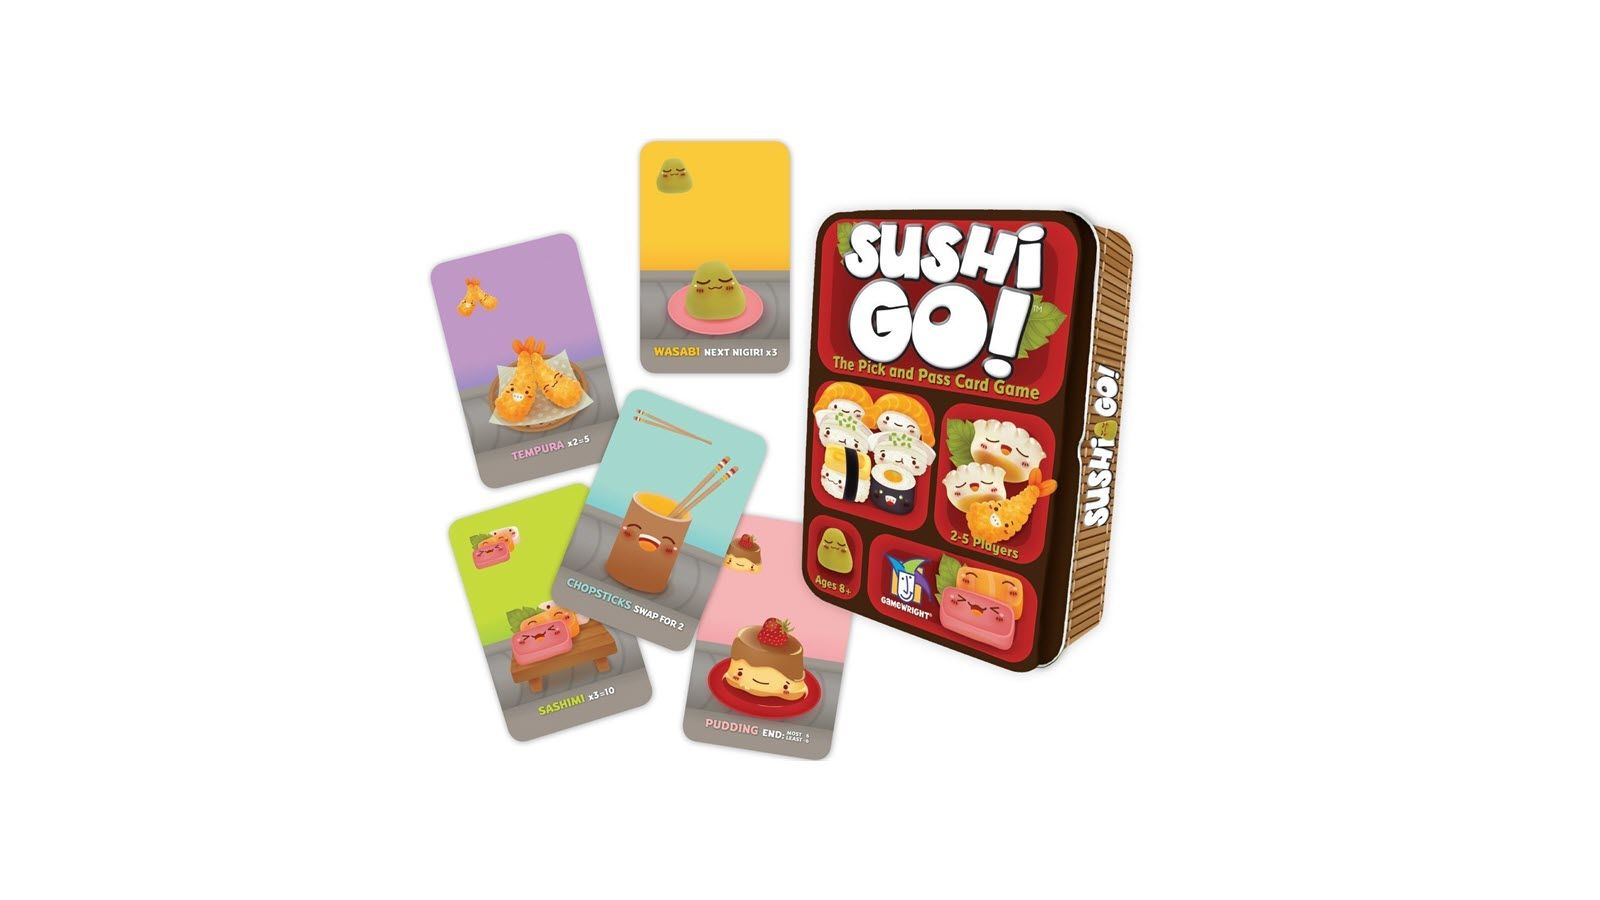 The Sushi Go! card game box, and five cards from the game.